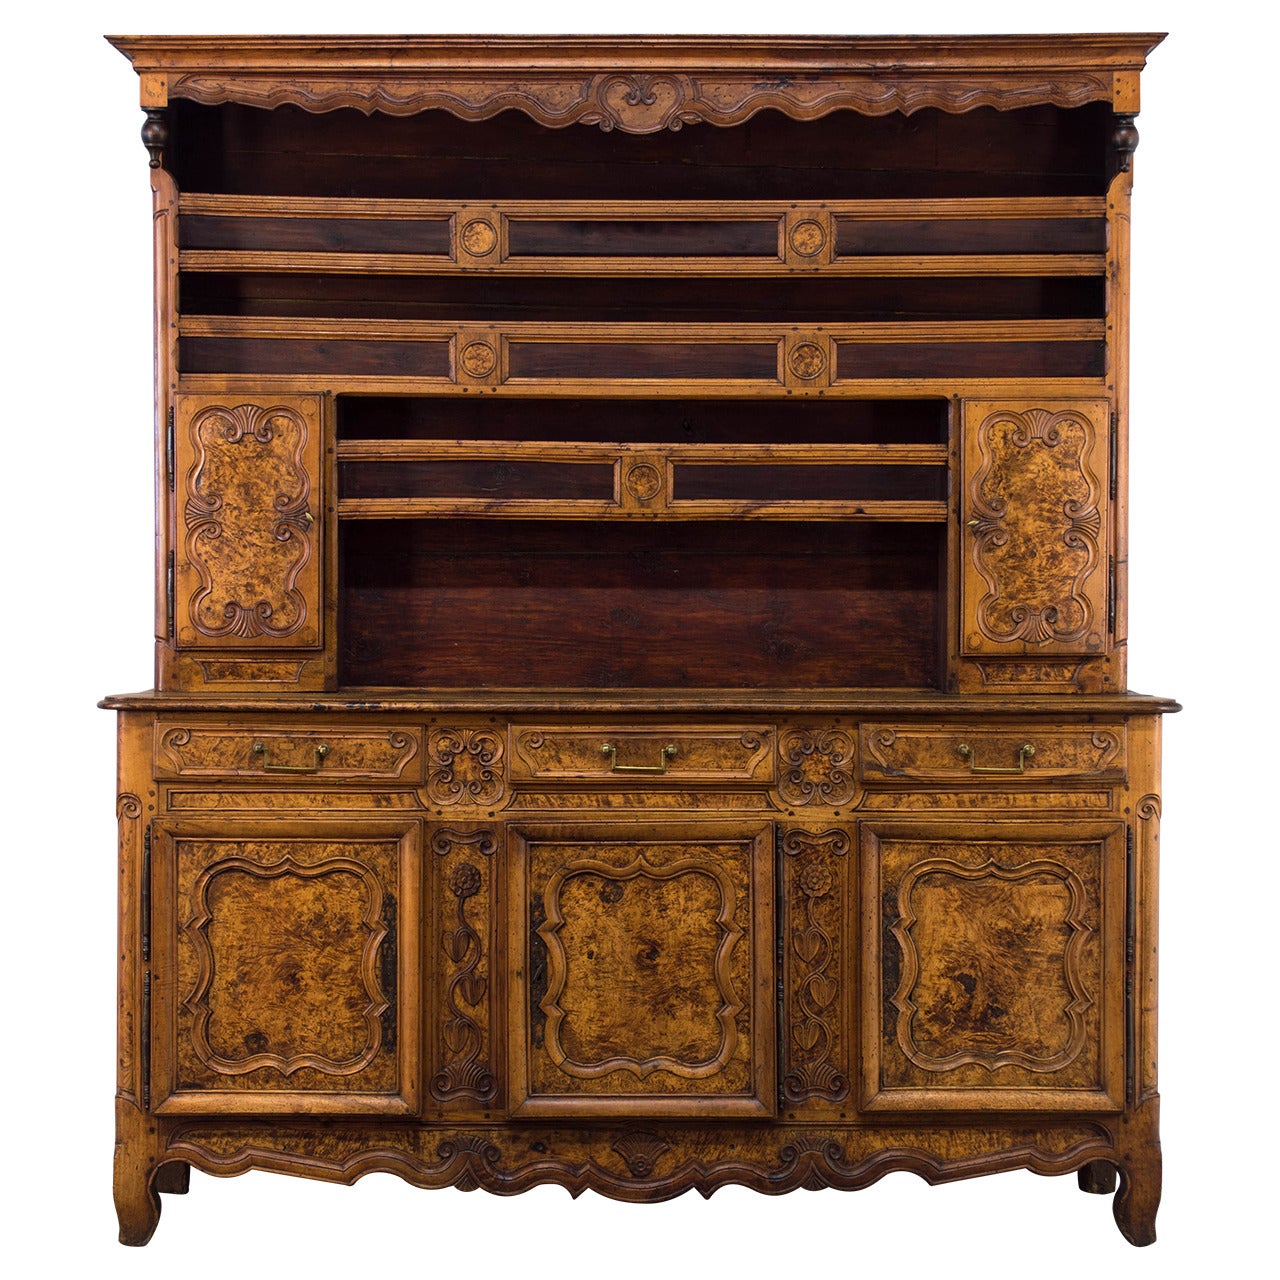 18th Century French Vaisselier or Sideboard